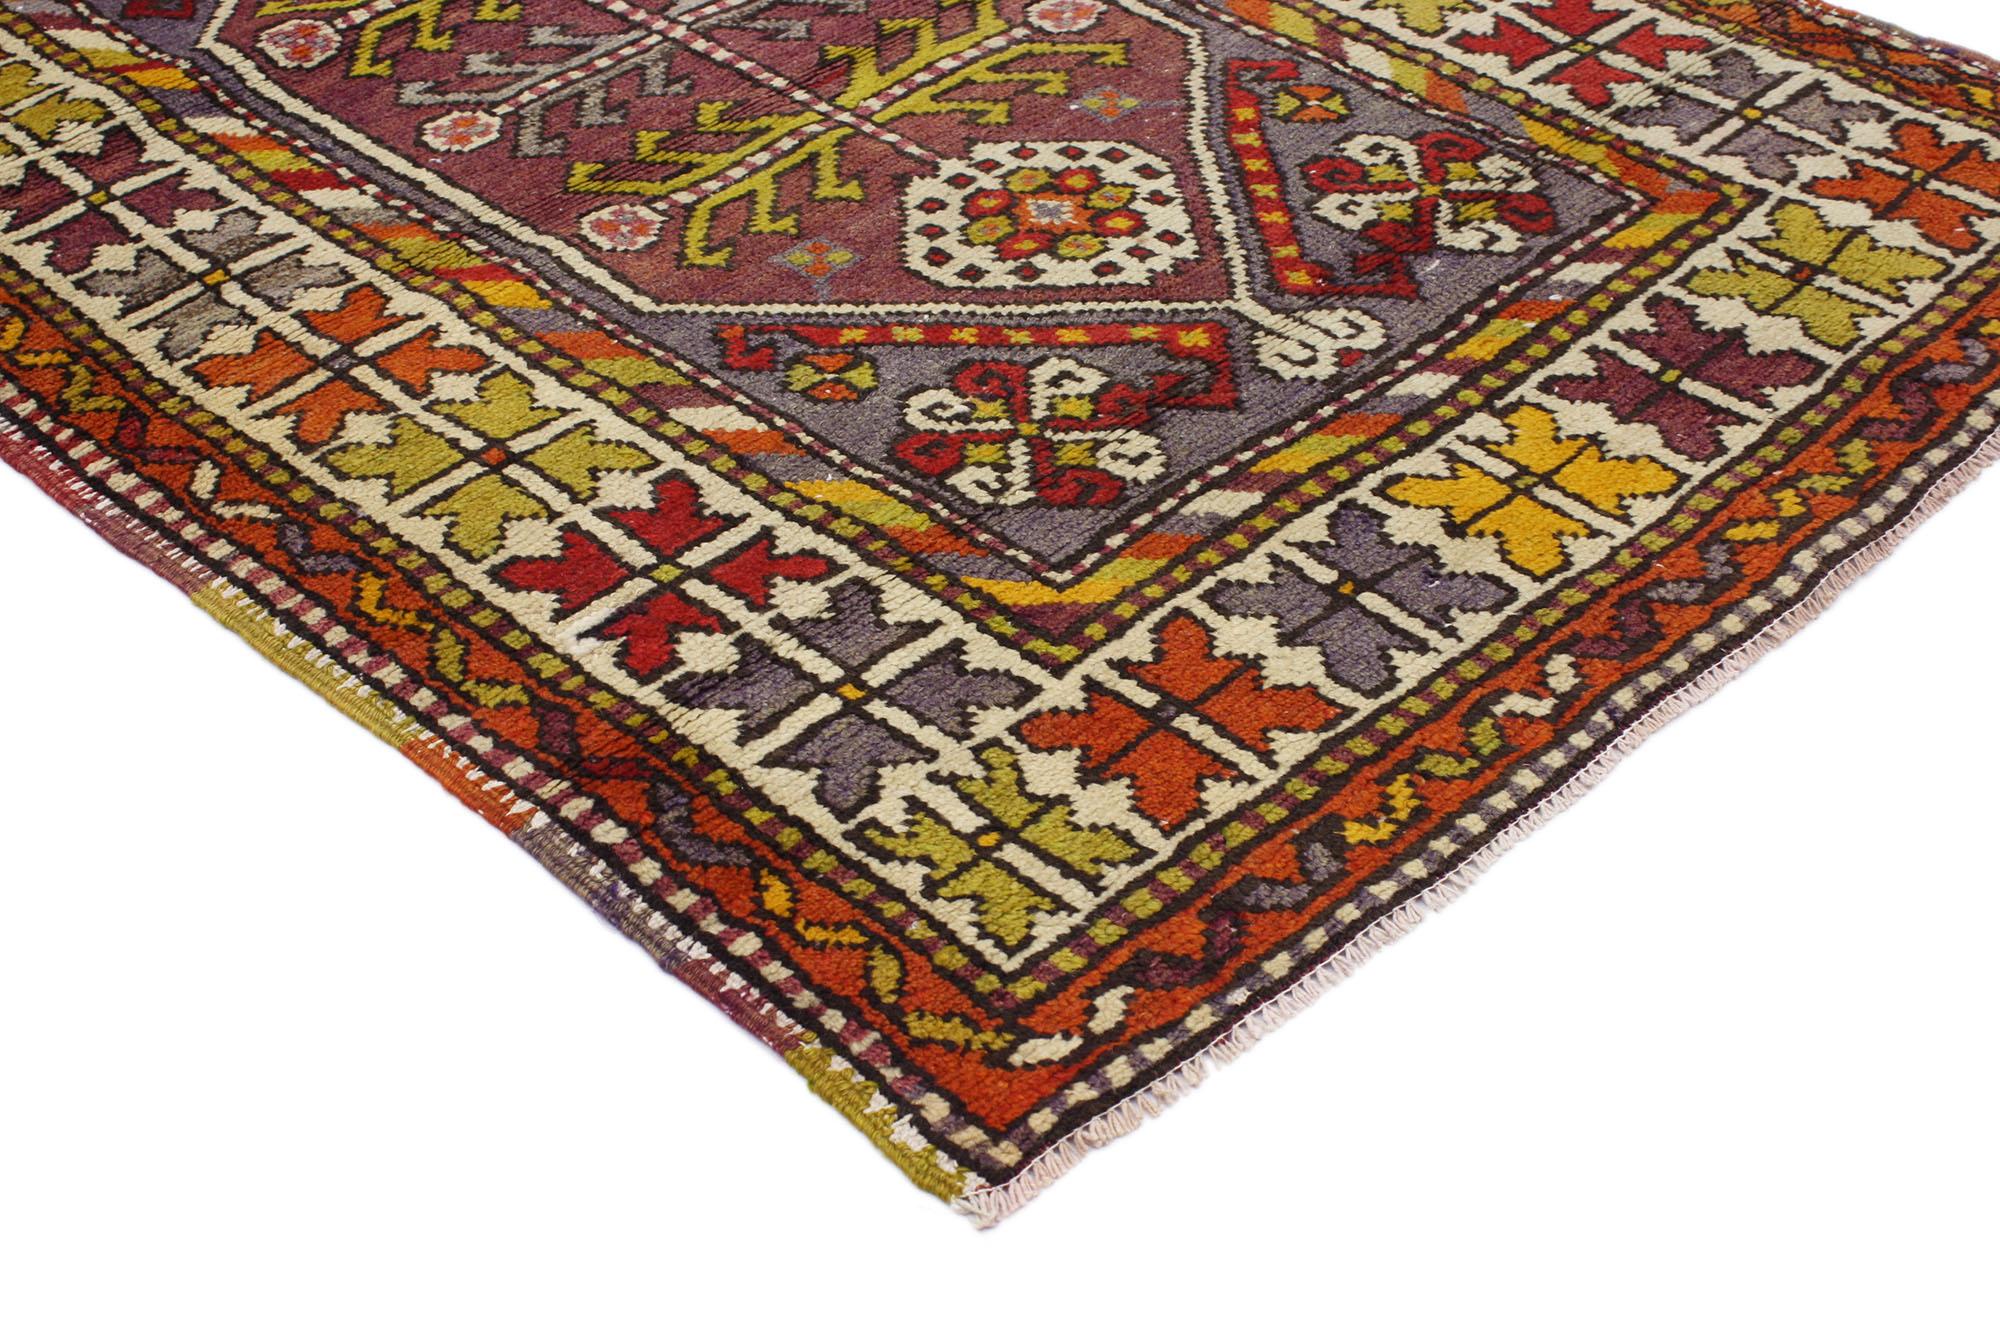 51762 Vintage Turkish Oushak Rug, 03'00 x 04'09.
Colorfully curated meets whimsical boho in this colorful Oushak rug. The eye-catching tribal design and lively colors woven into this piece work together creating a bold, exotic look. The composition